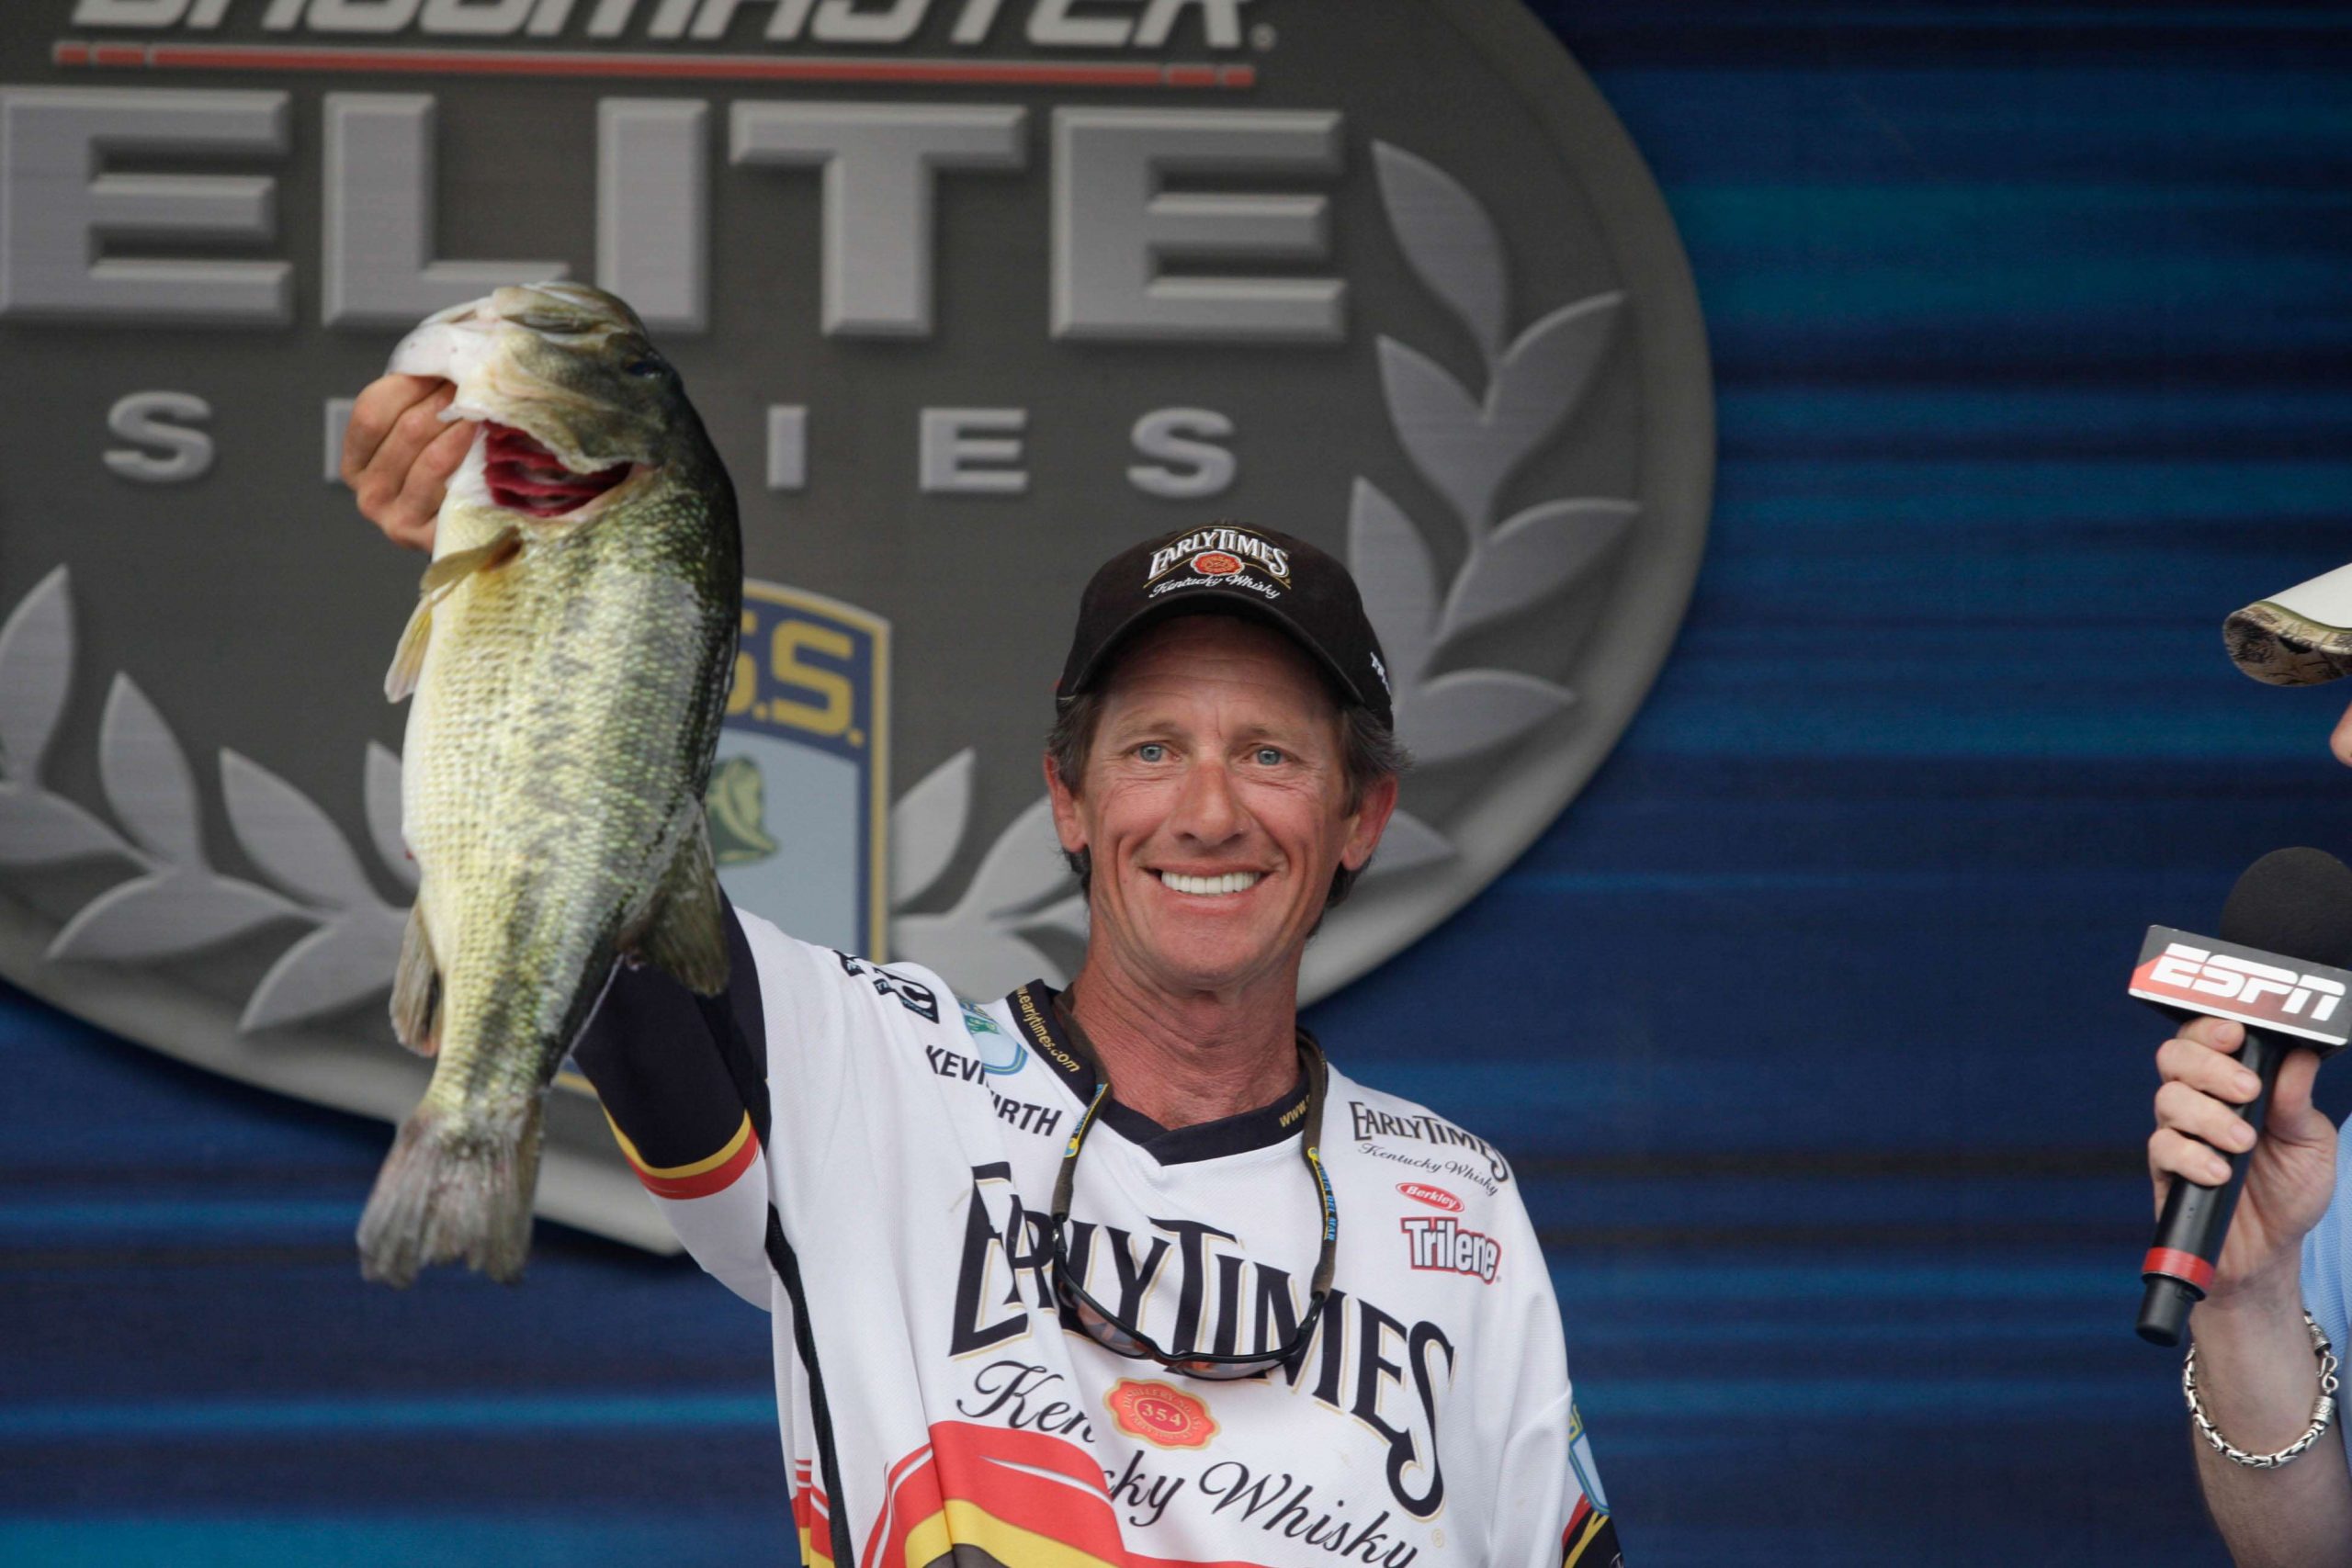 Kevin Wirth is one of the four anglers who topped 100 pounds. He caught 102-3 over four days, ending in third place. Wirth is now retired from the Elite Series, so he won't be a threat this year.